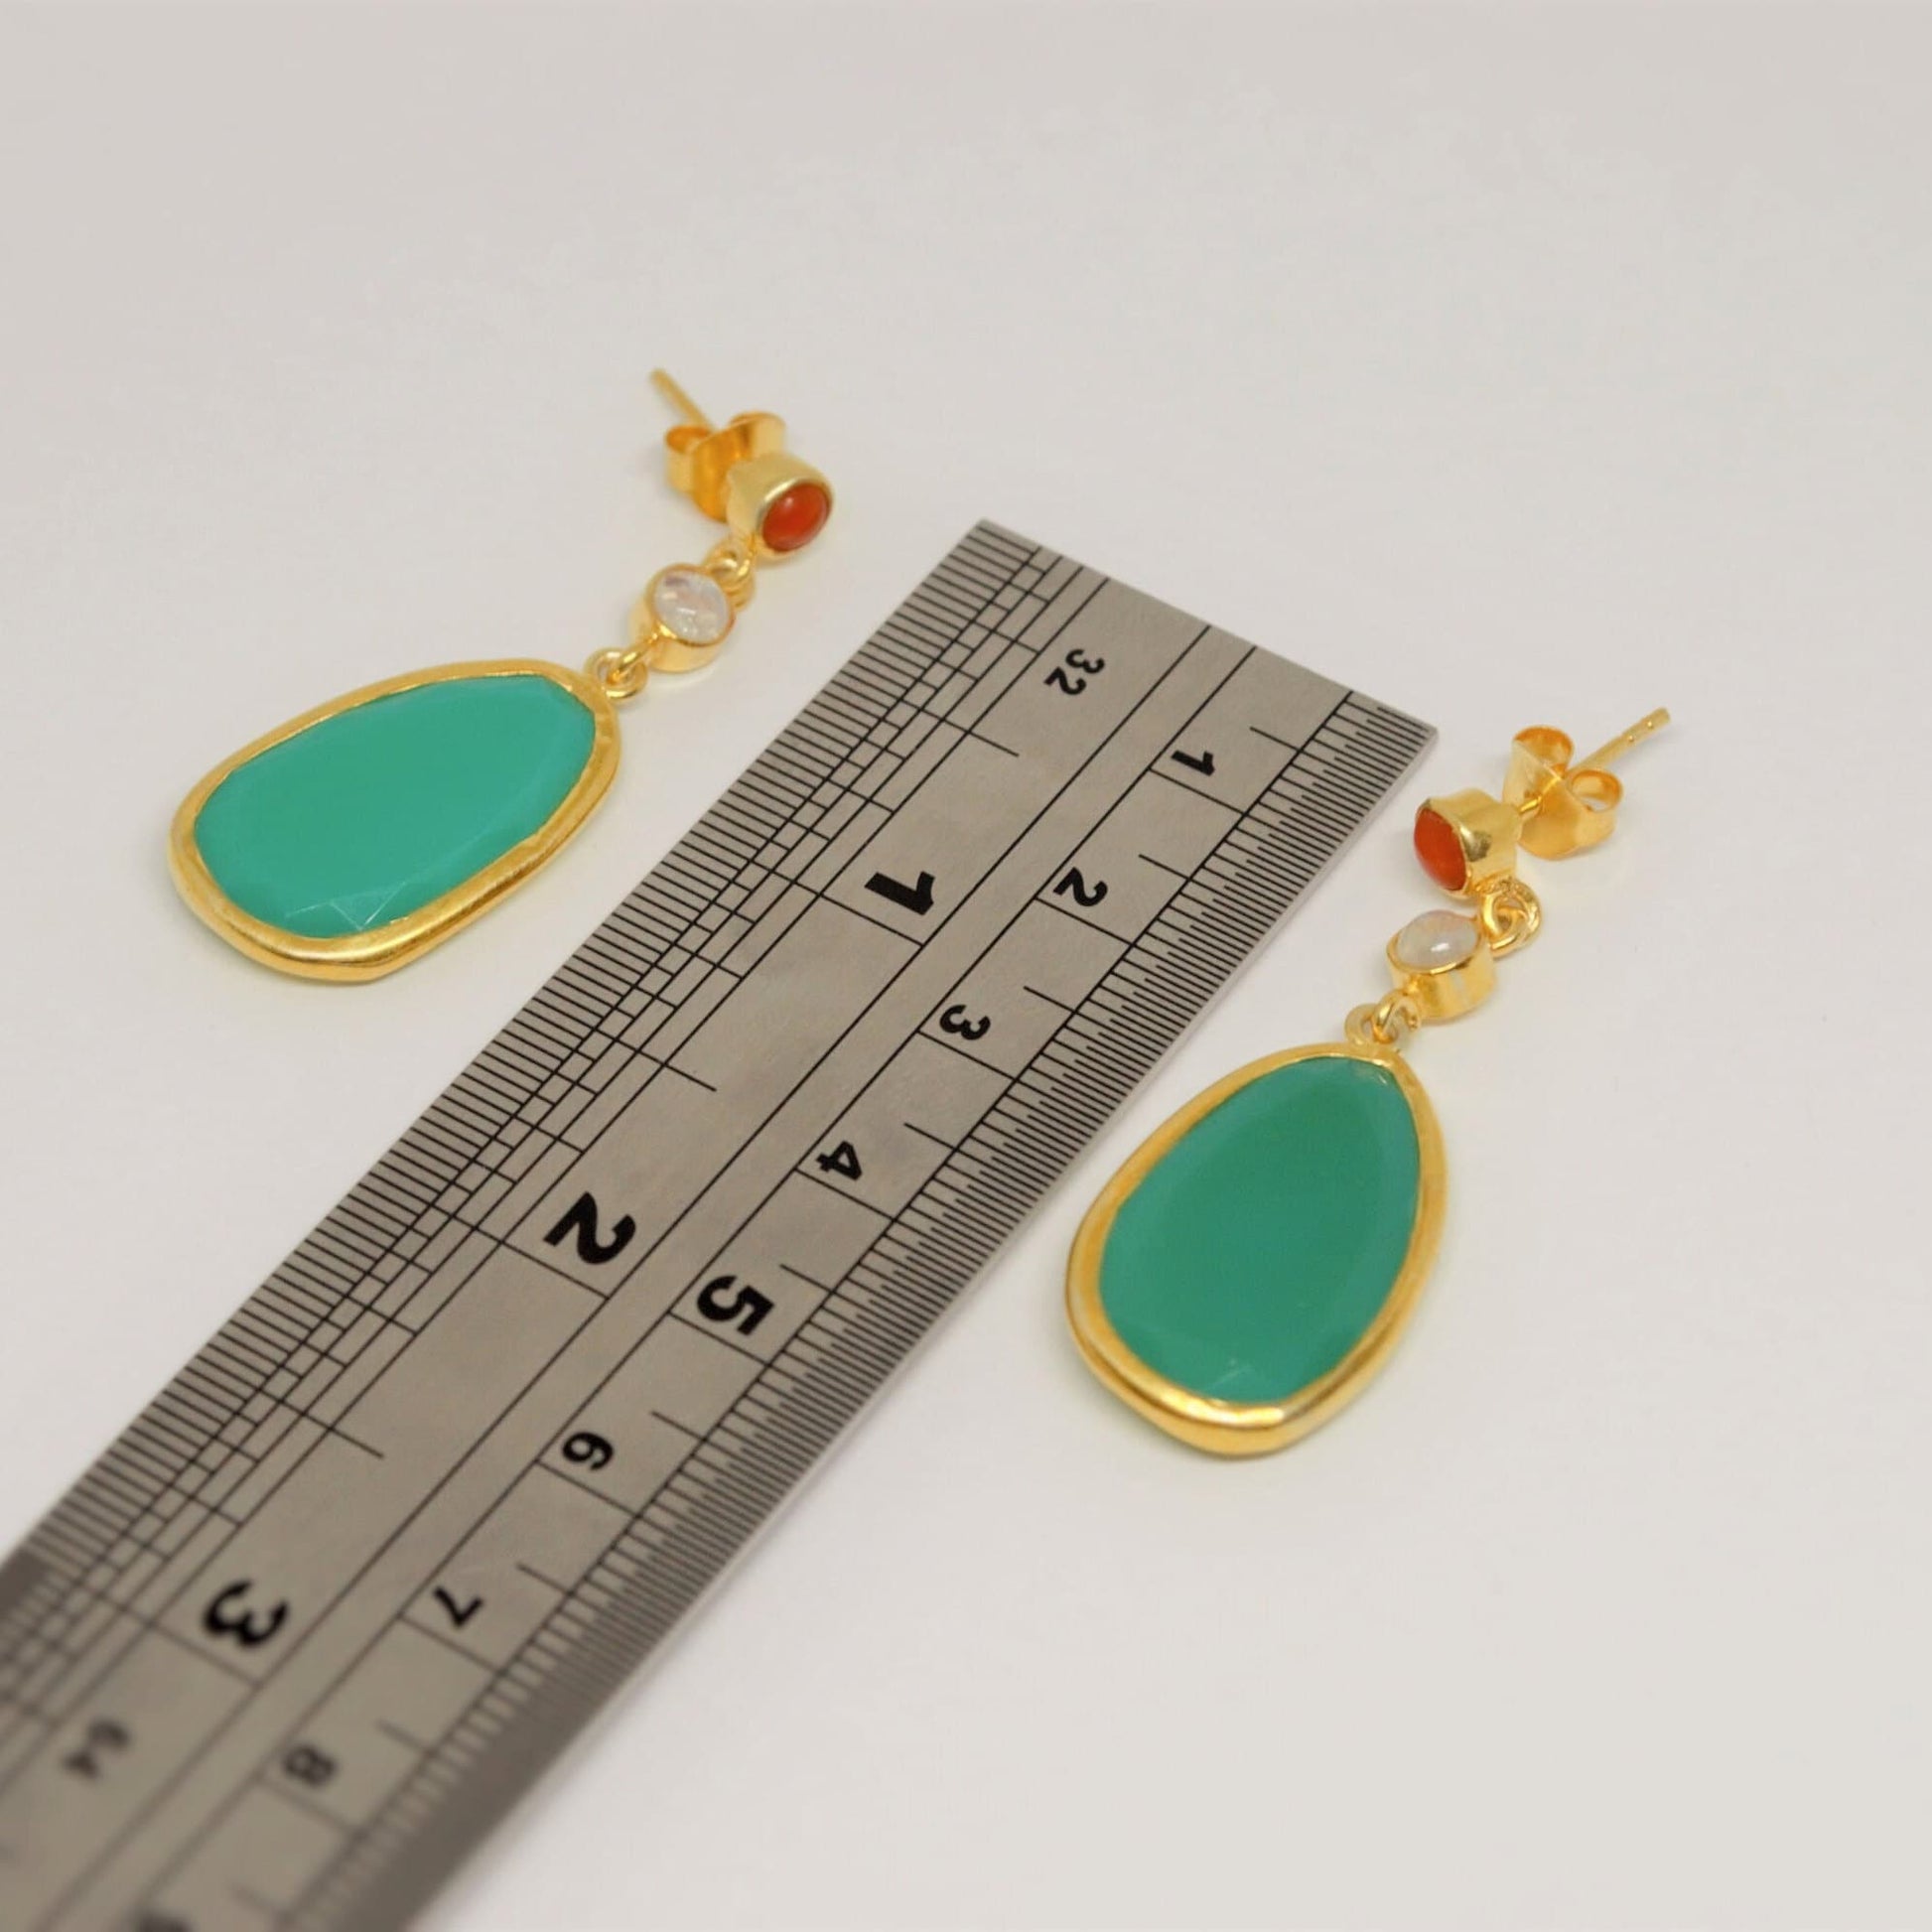 Chalcedony, Moonstone, Coral Earrings, Chalcedony Jewelry, Gold Plated 925 Sterling Silver Earrings, Green Earrings, Mothers Day Gift